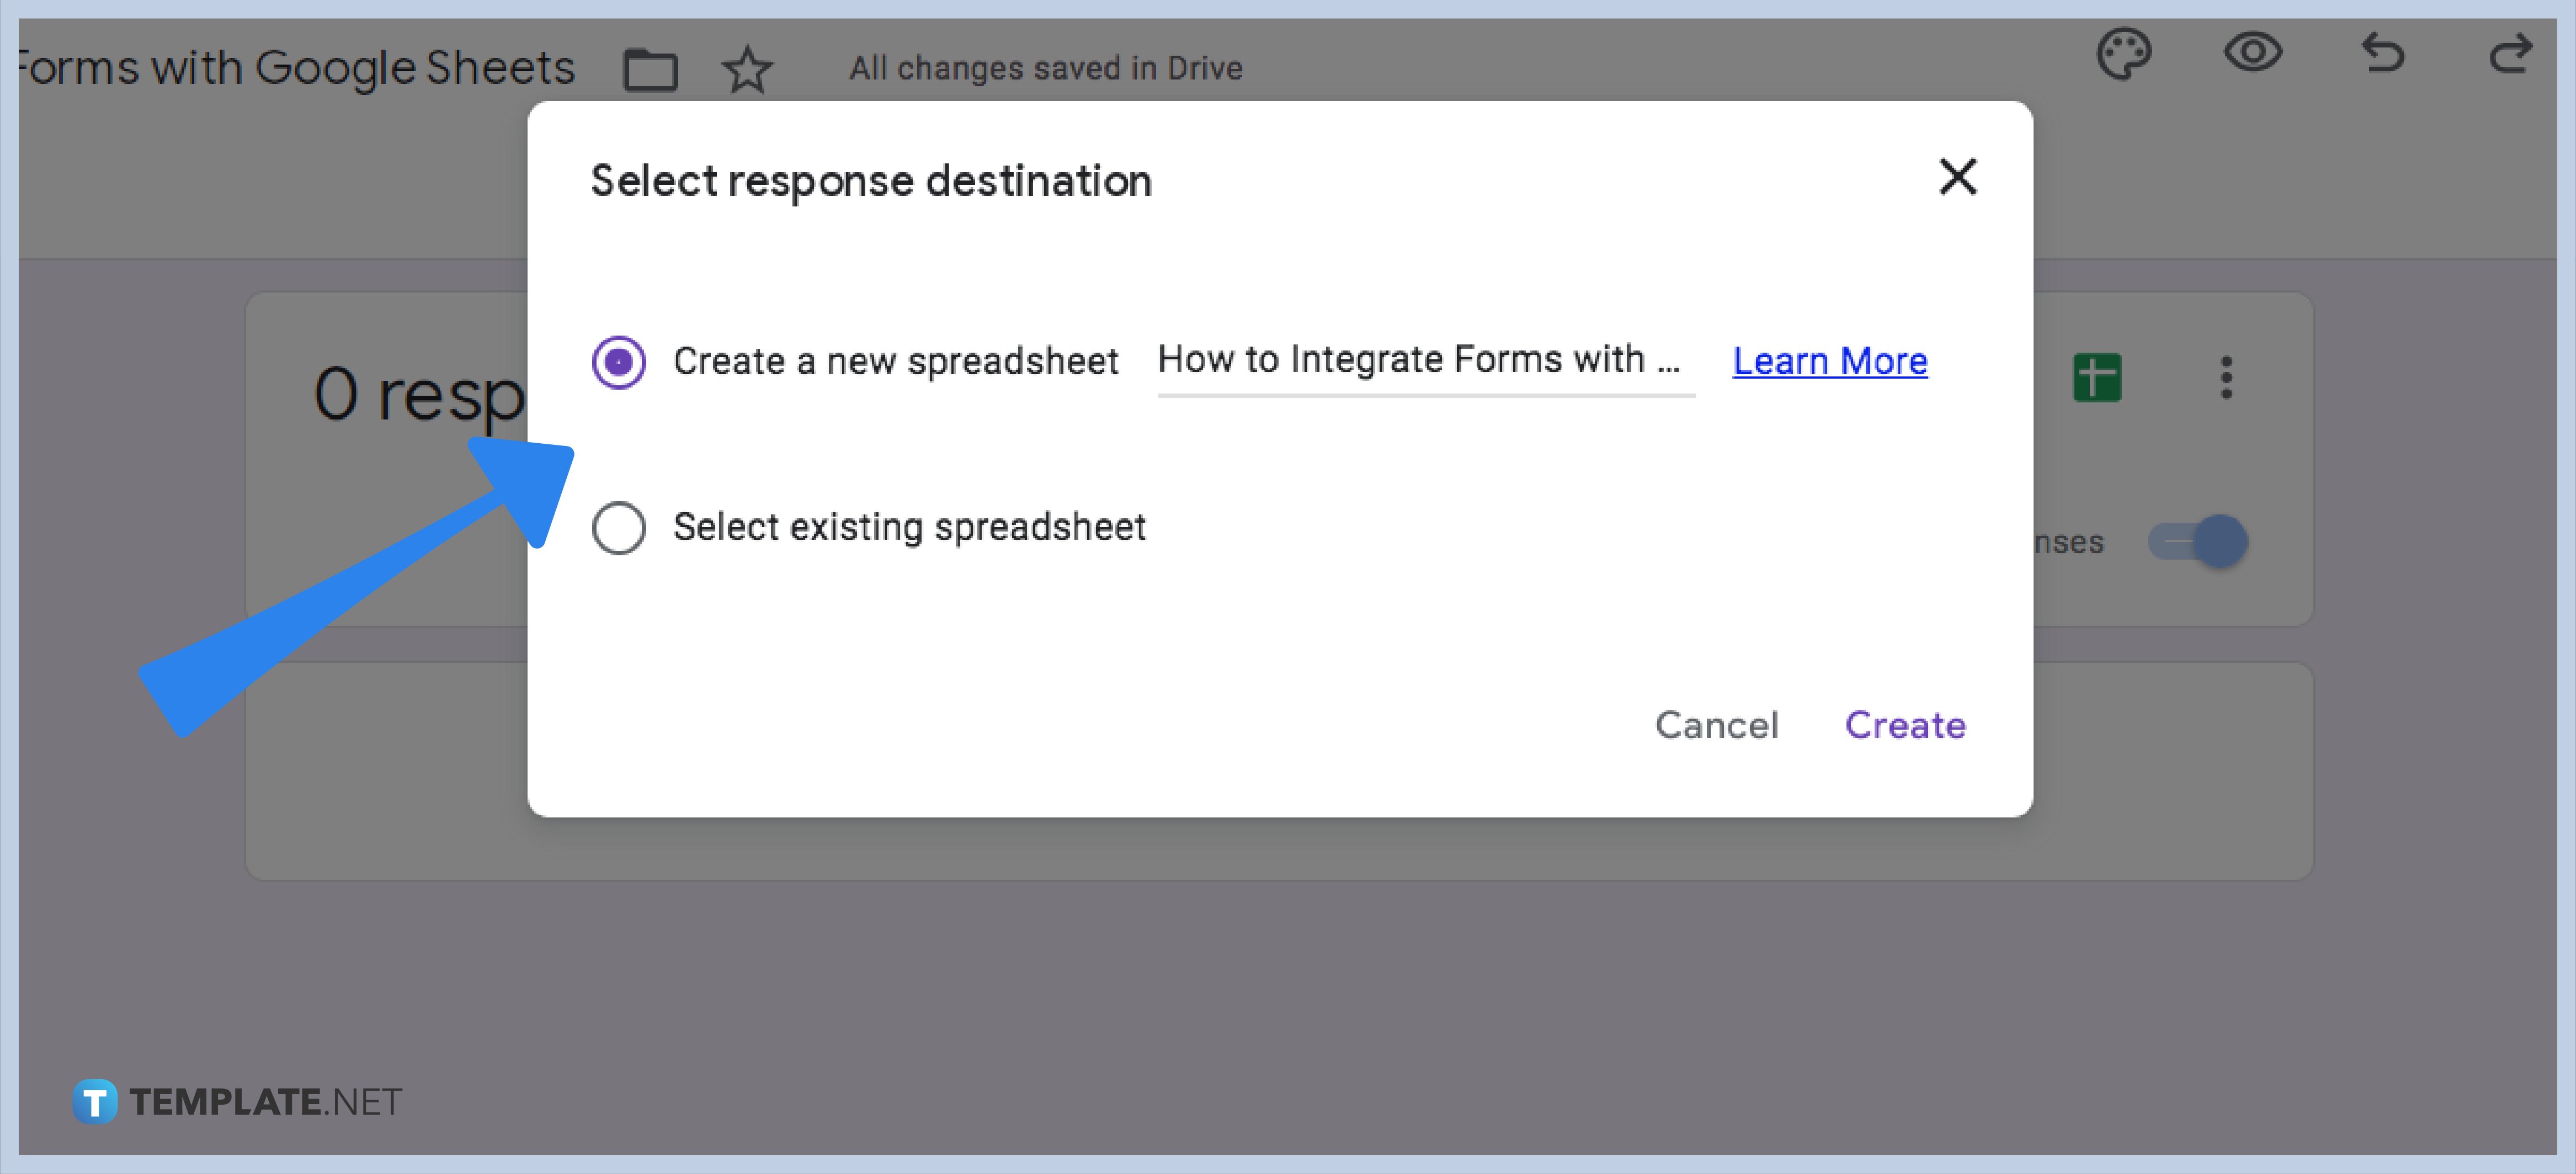 how-to-integrate-forms-with-google-sheets-step-4